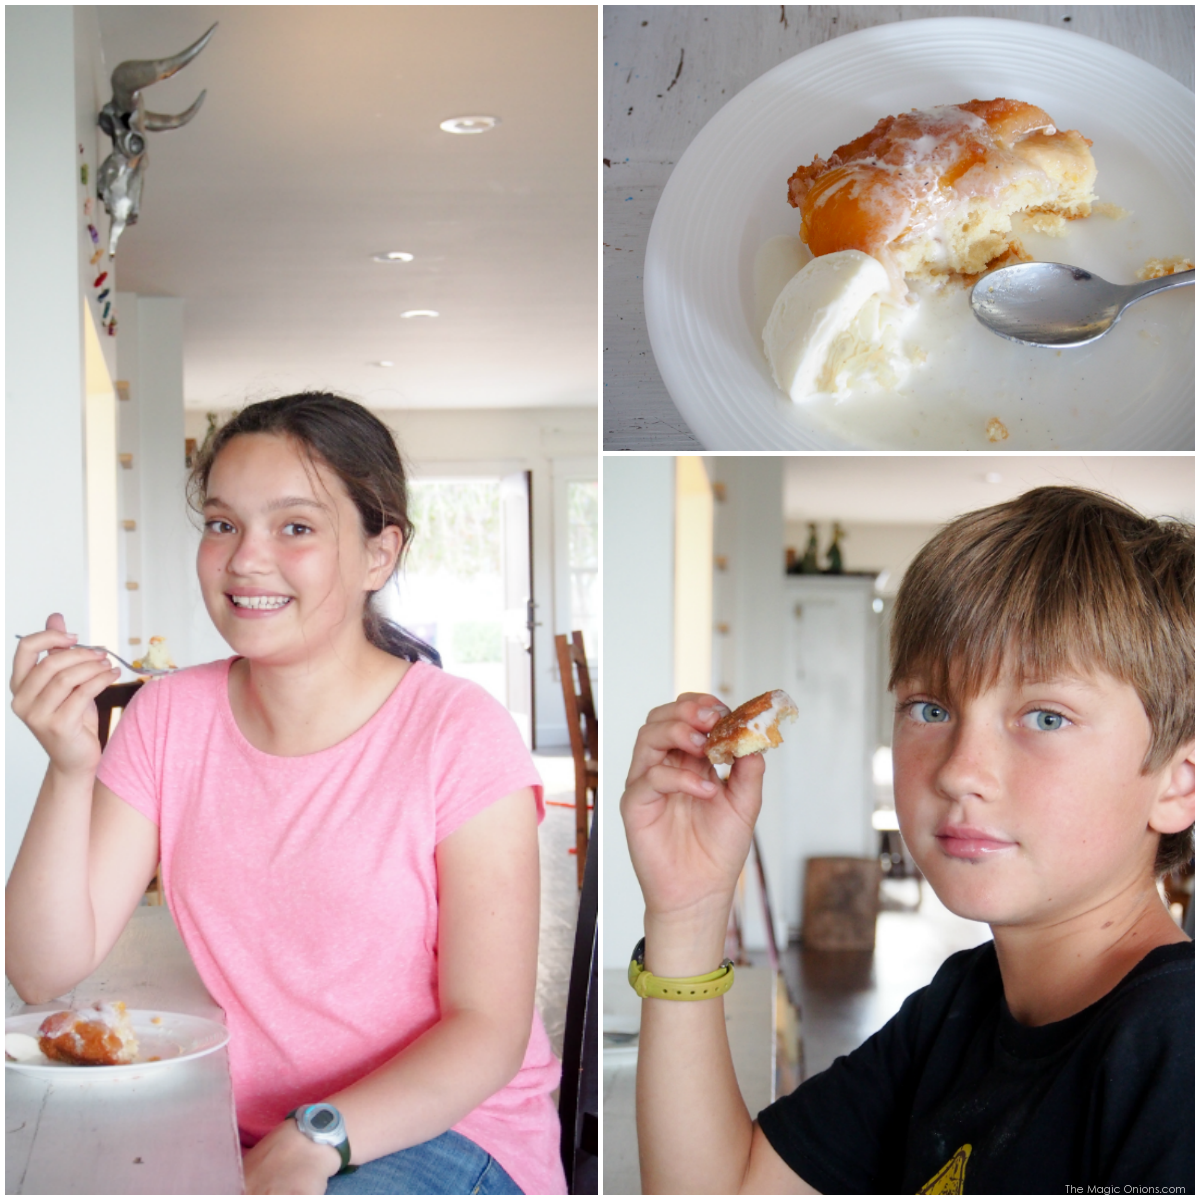 Fresh Cake Recipe with photos of kids baking from The Magic Onions Blog